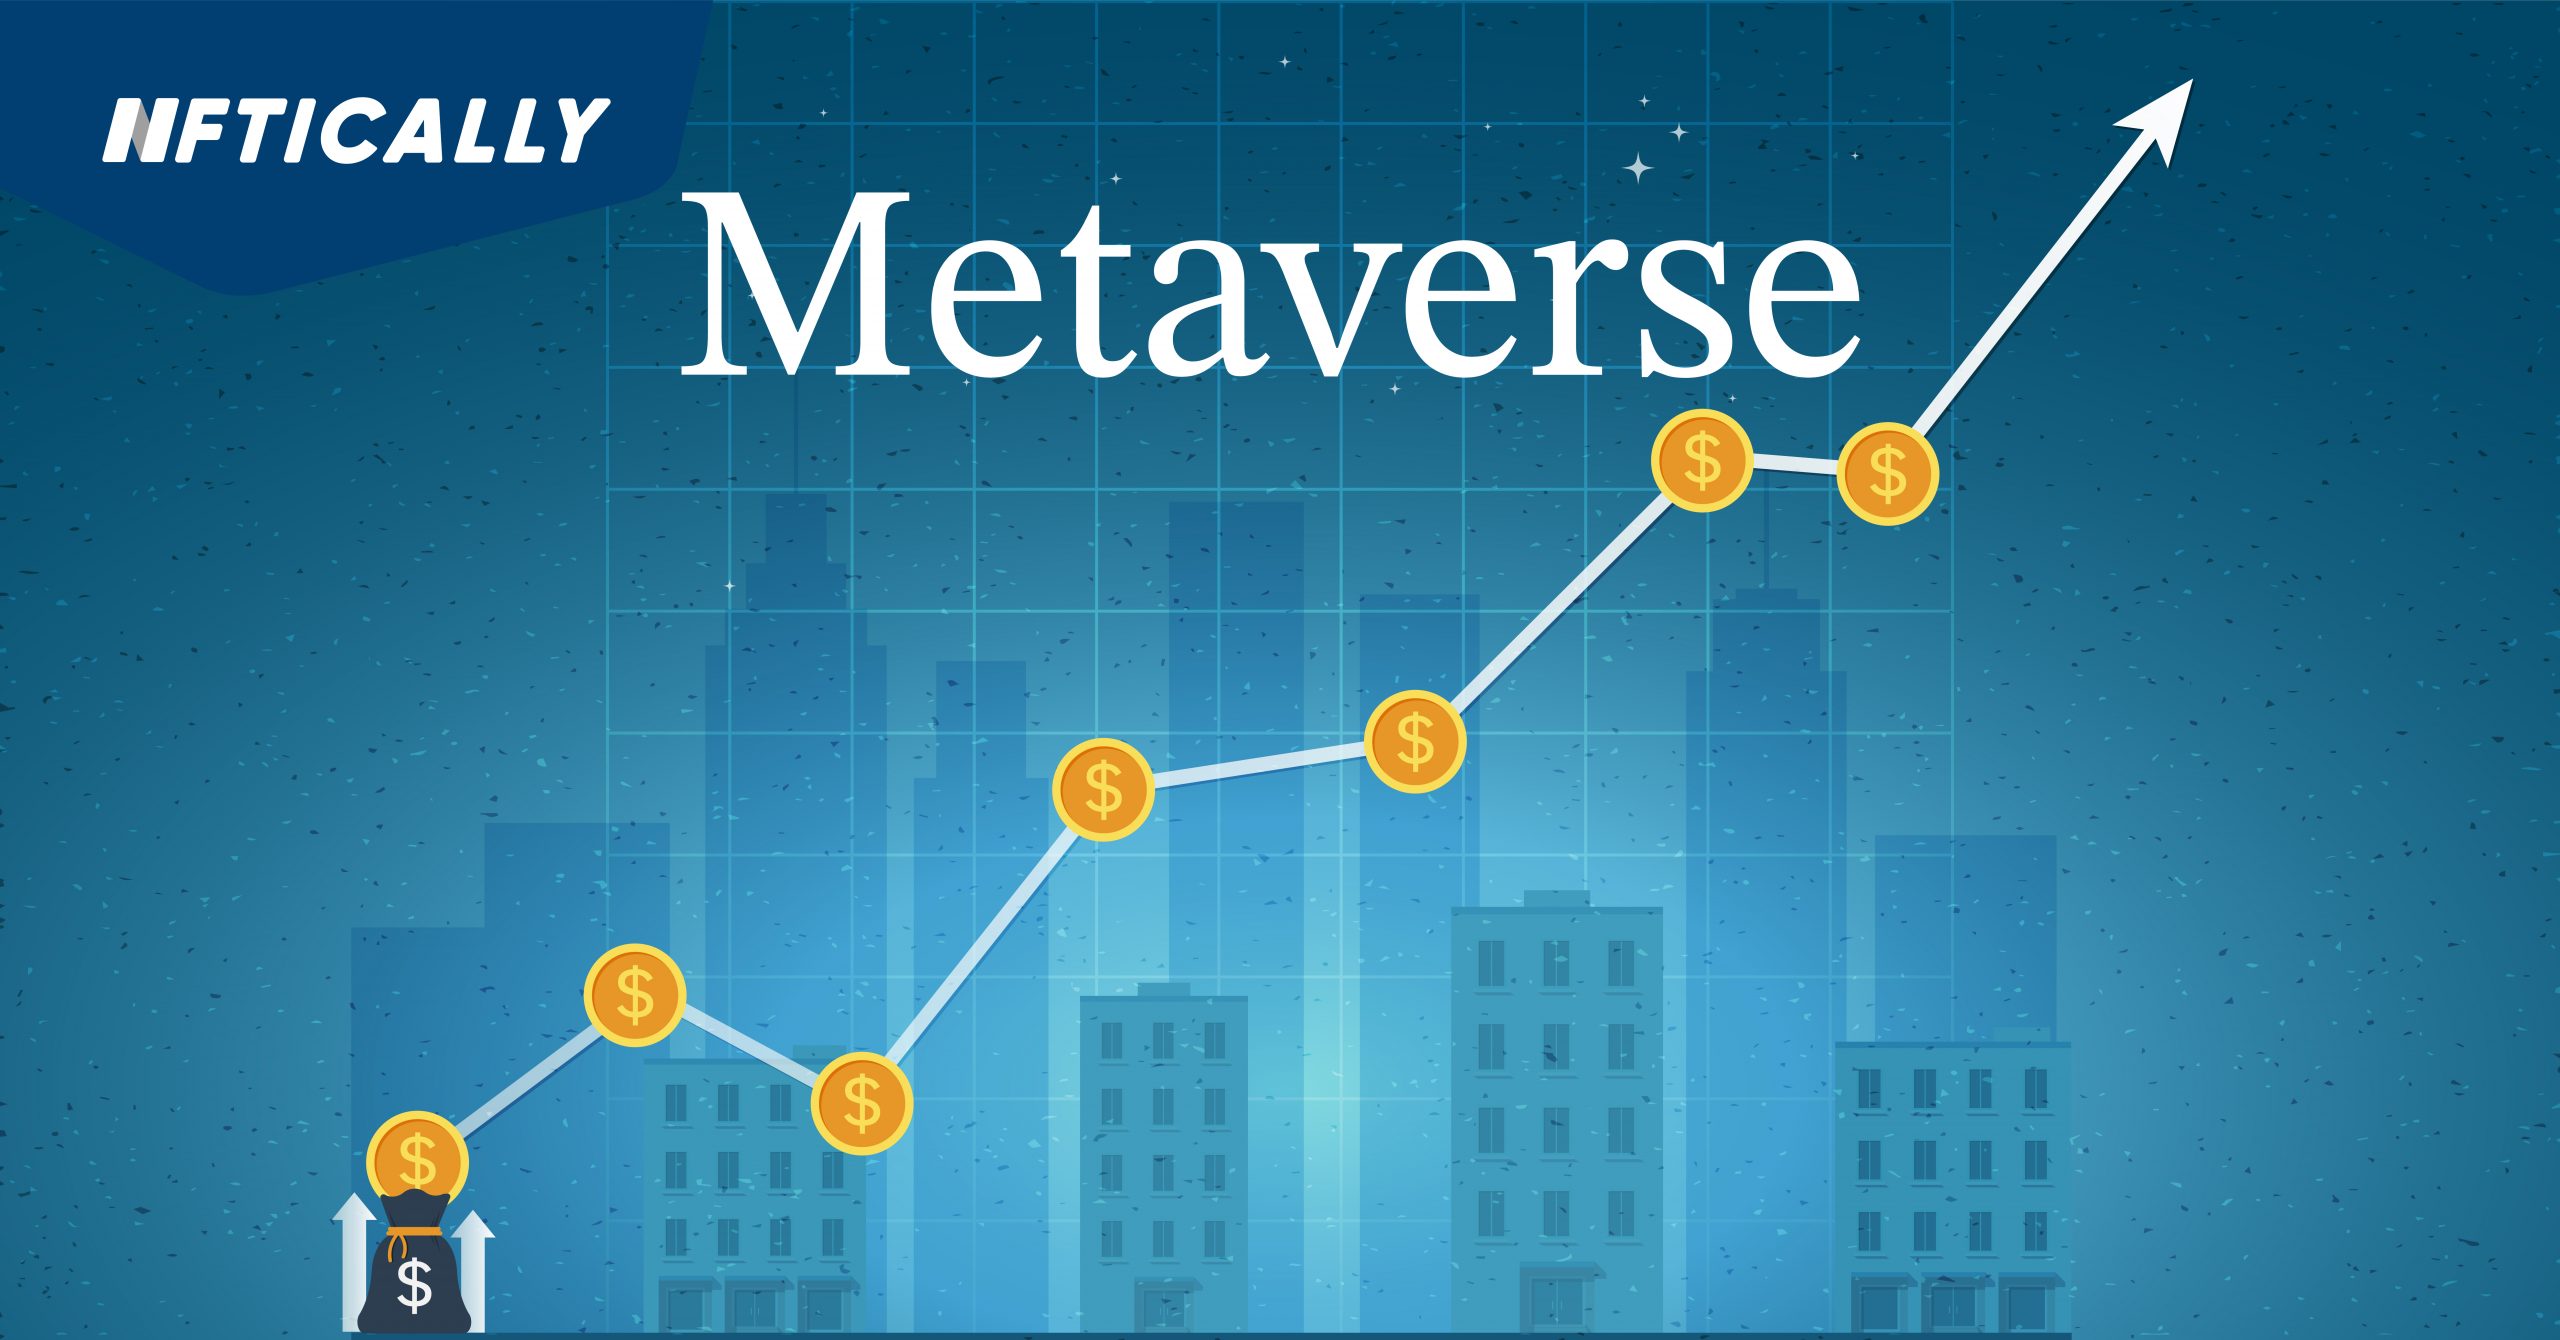 How to Invest in Metaverse Real Estate?